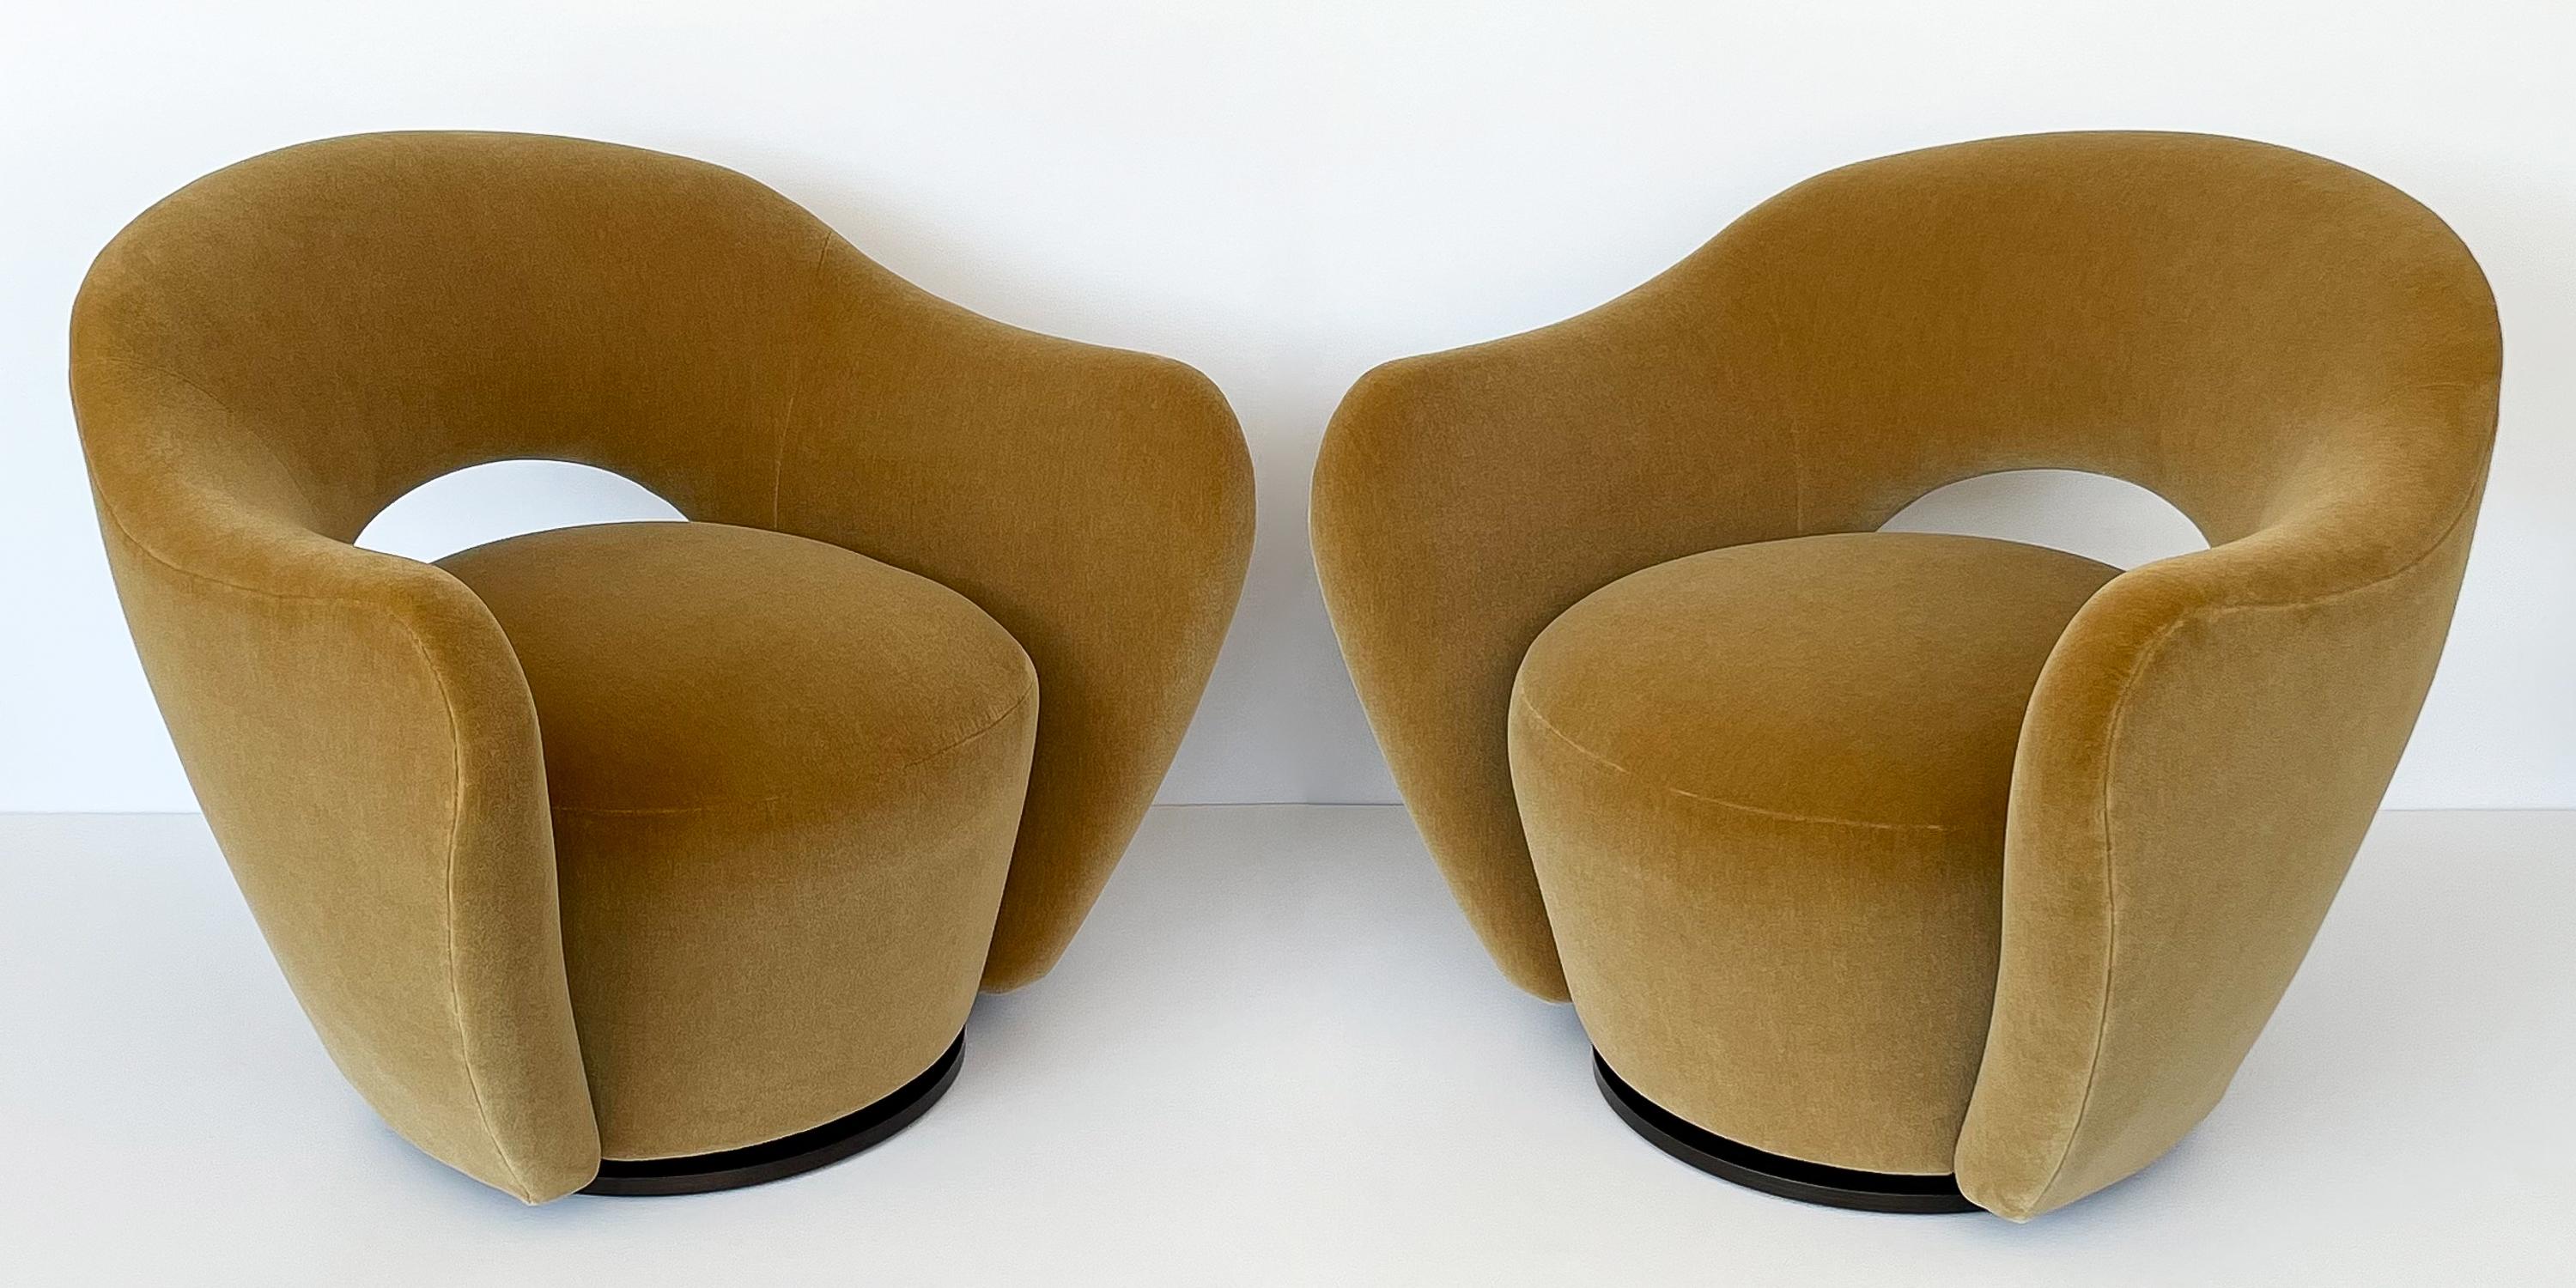 Pair of Vladimir Kagan open back swivel lounge chairs for Directional. Newly upholstered in a gorgeous and sophisticated camel / caramel colored plush mohair with all new foam throughout. Newly finished dark walnut wood pedestal bases with 360